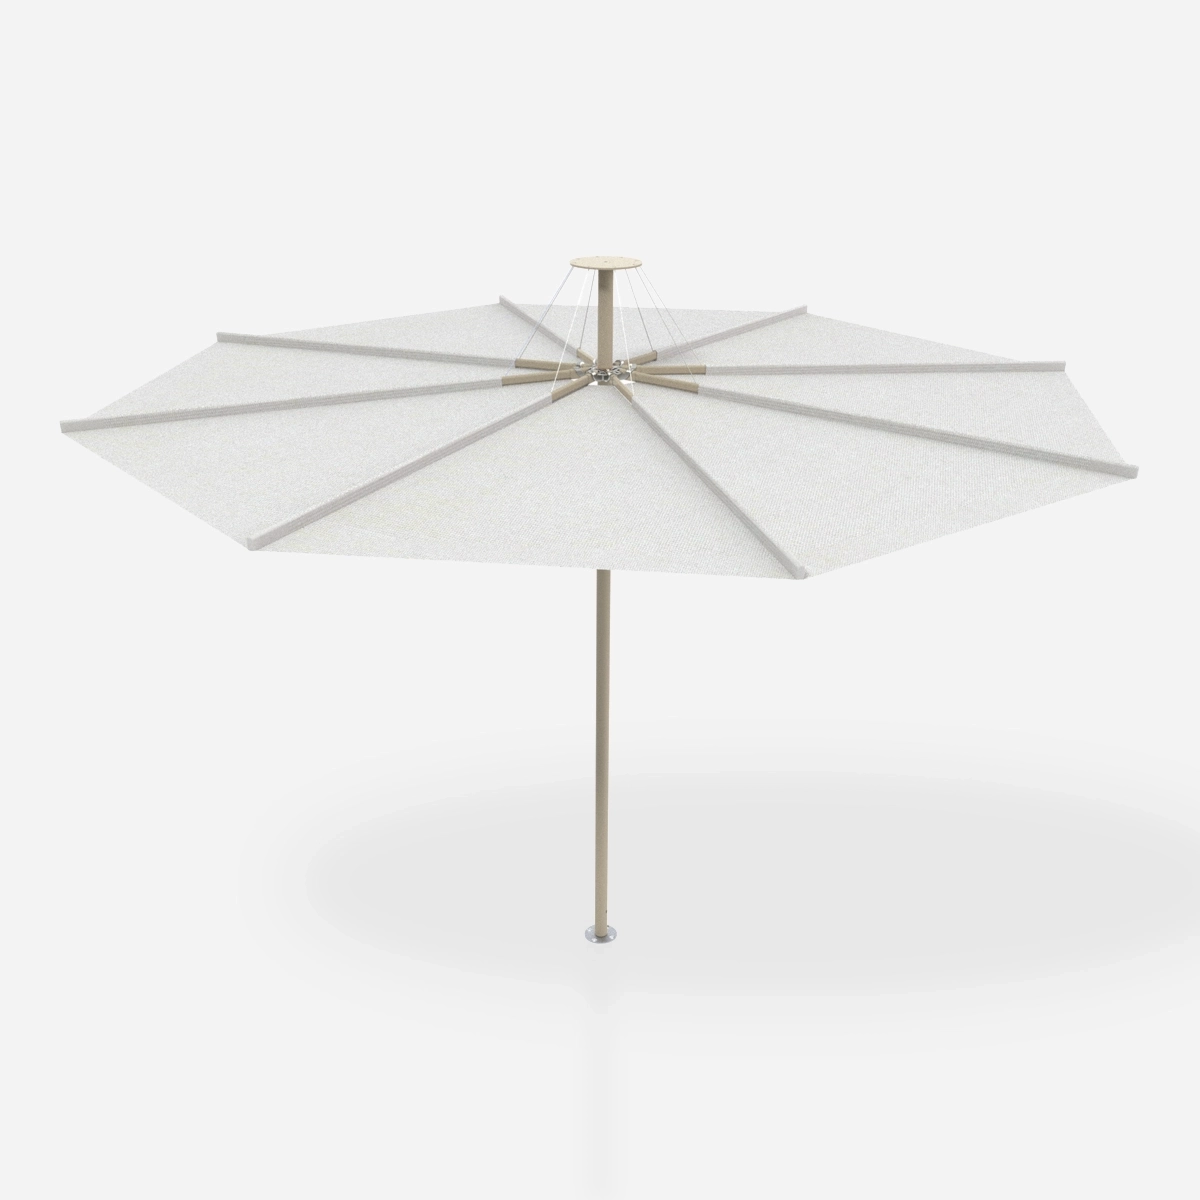 Cover image for the Umbrellas Product Type